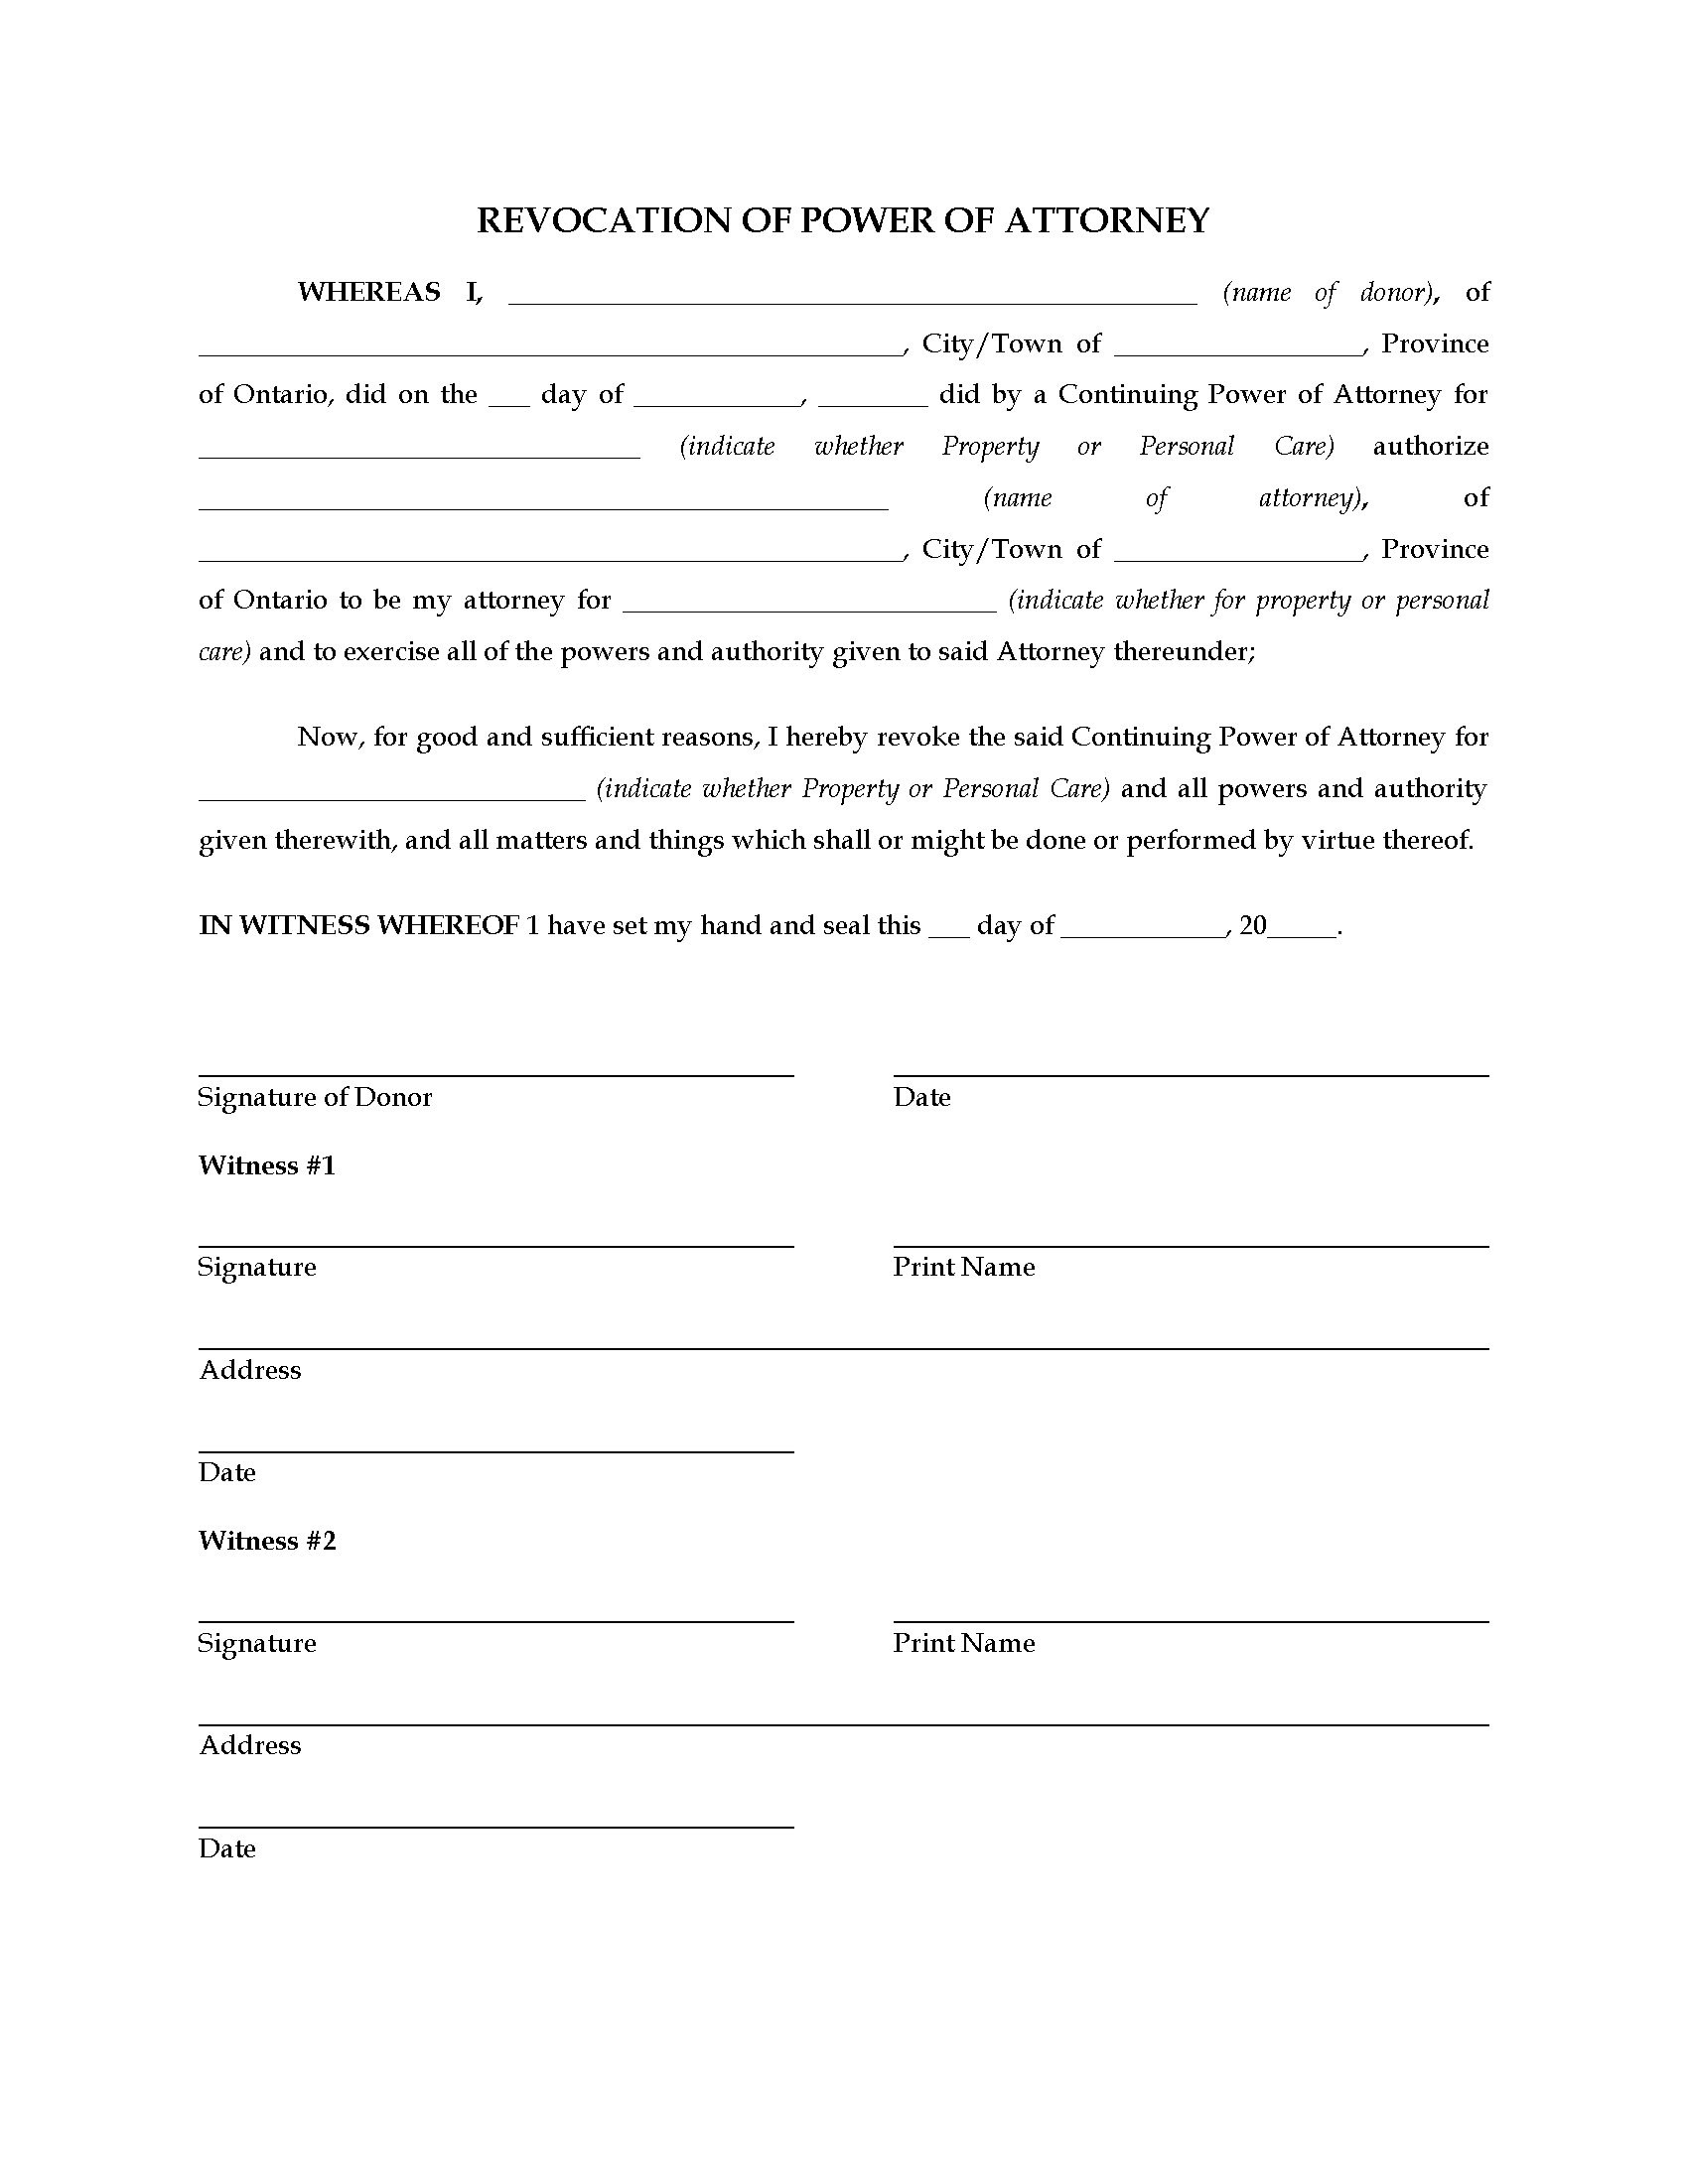 Ontario Revocation Of Power Attorney Legal Forms And Business Document